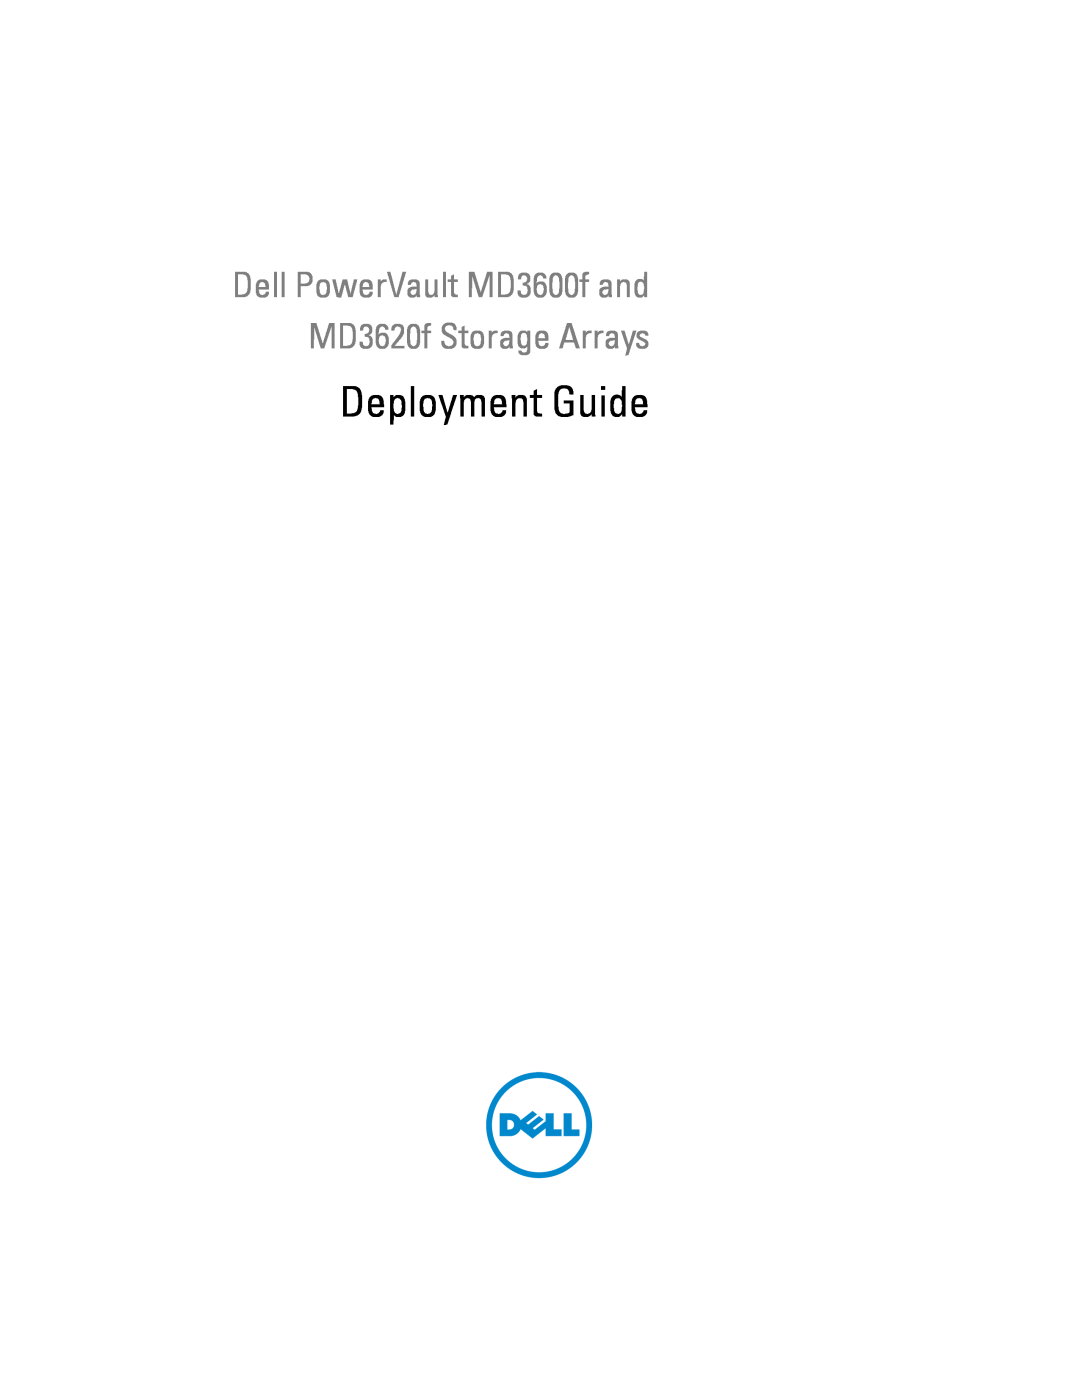 Dell MD3620F manual Deployment Guide, Dell PowerVault MD3600f and MD3620f Storage Arrays 